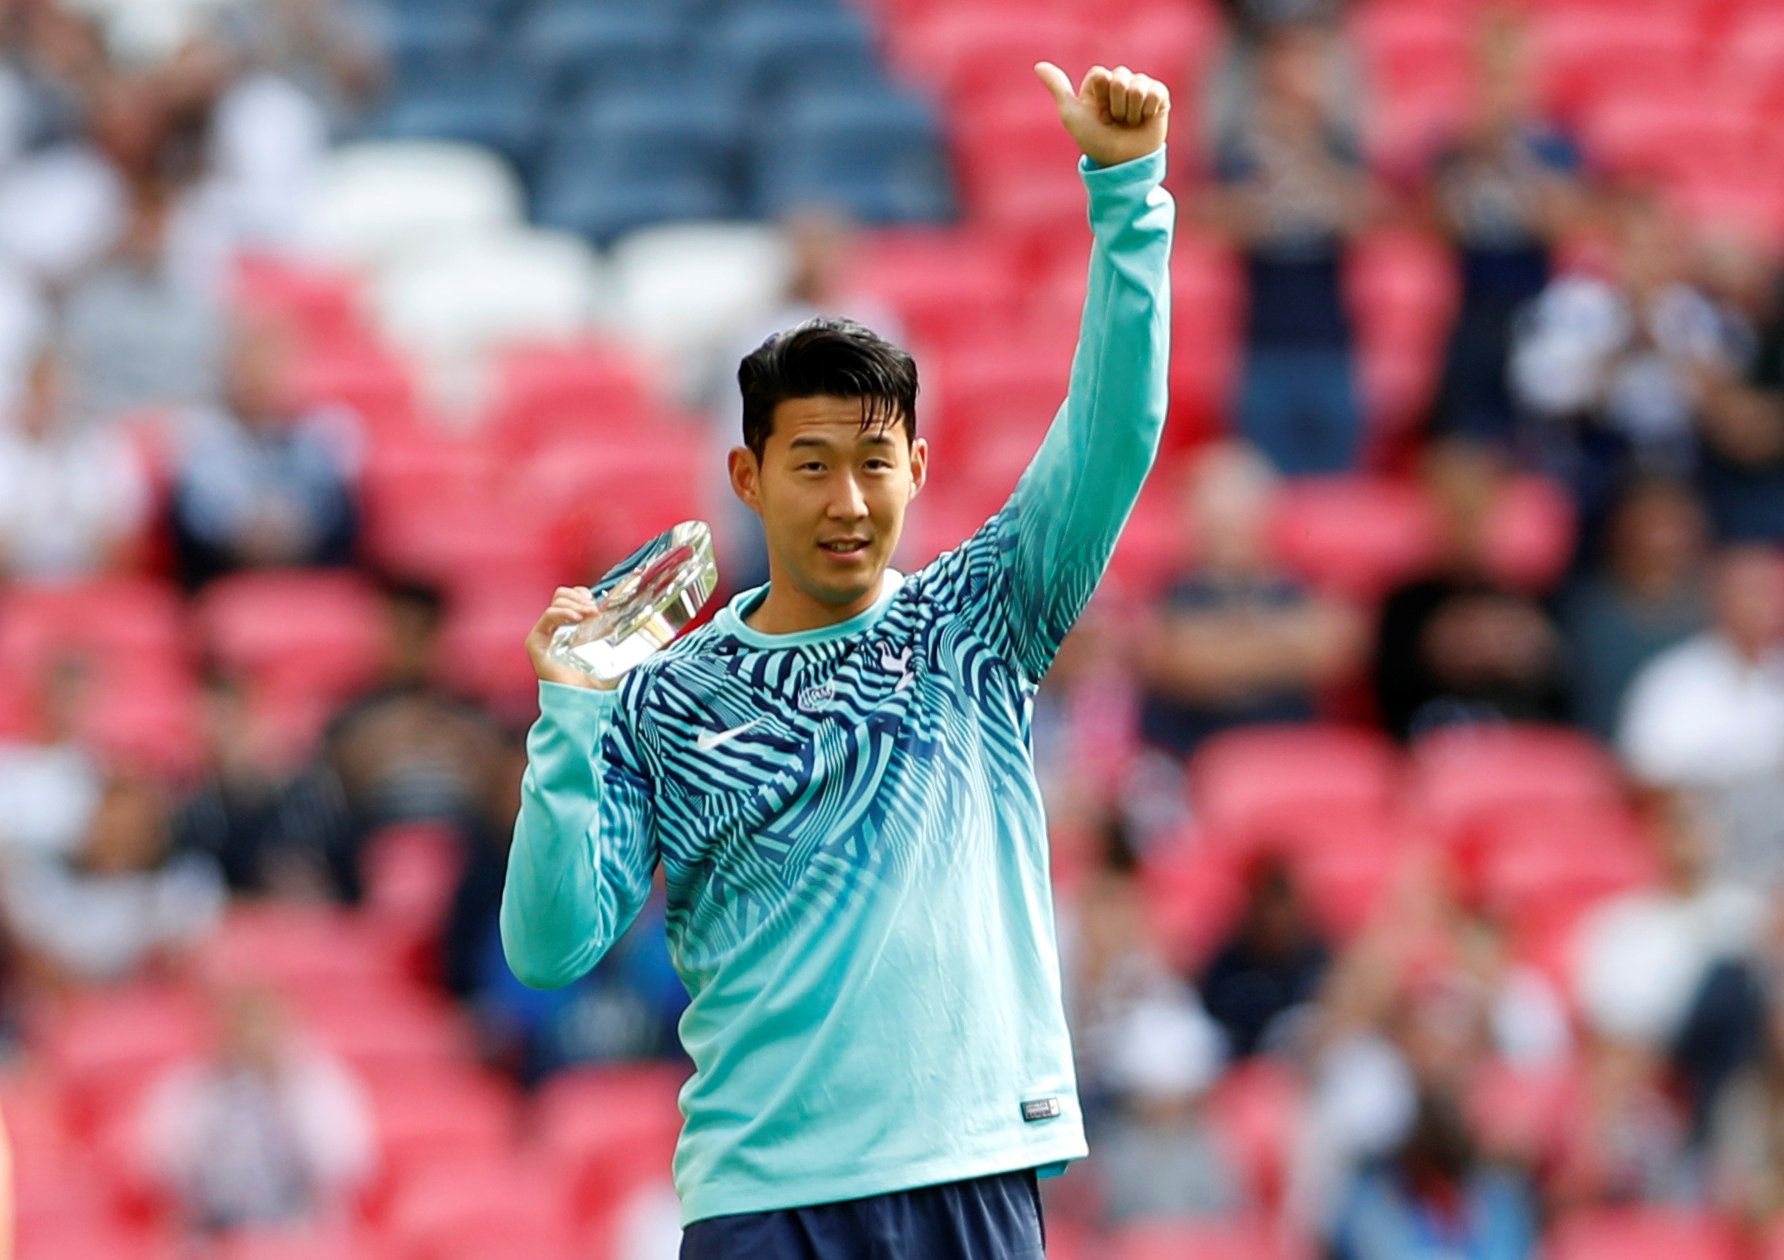 Soccer Football - Premier League - Tottenham Hotspur v Liverpool - Wembley Stadium, London, Britain - September 15, 2018  Tottenham's Son Heung-min before the match  Action Images via Reuters/Paul Childs  EDITORIAL USE ONLY. No use with unauthorized audio, video, data, fixture lists, club/league logos or 